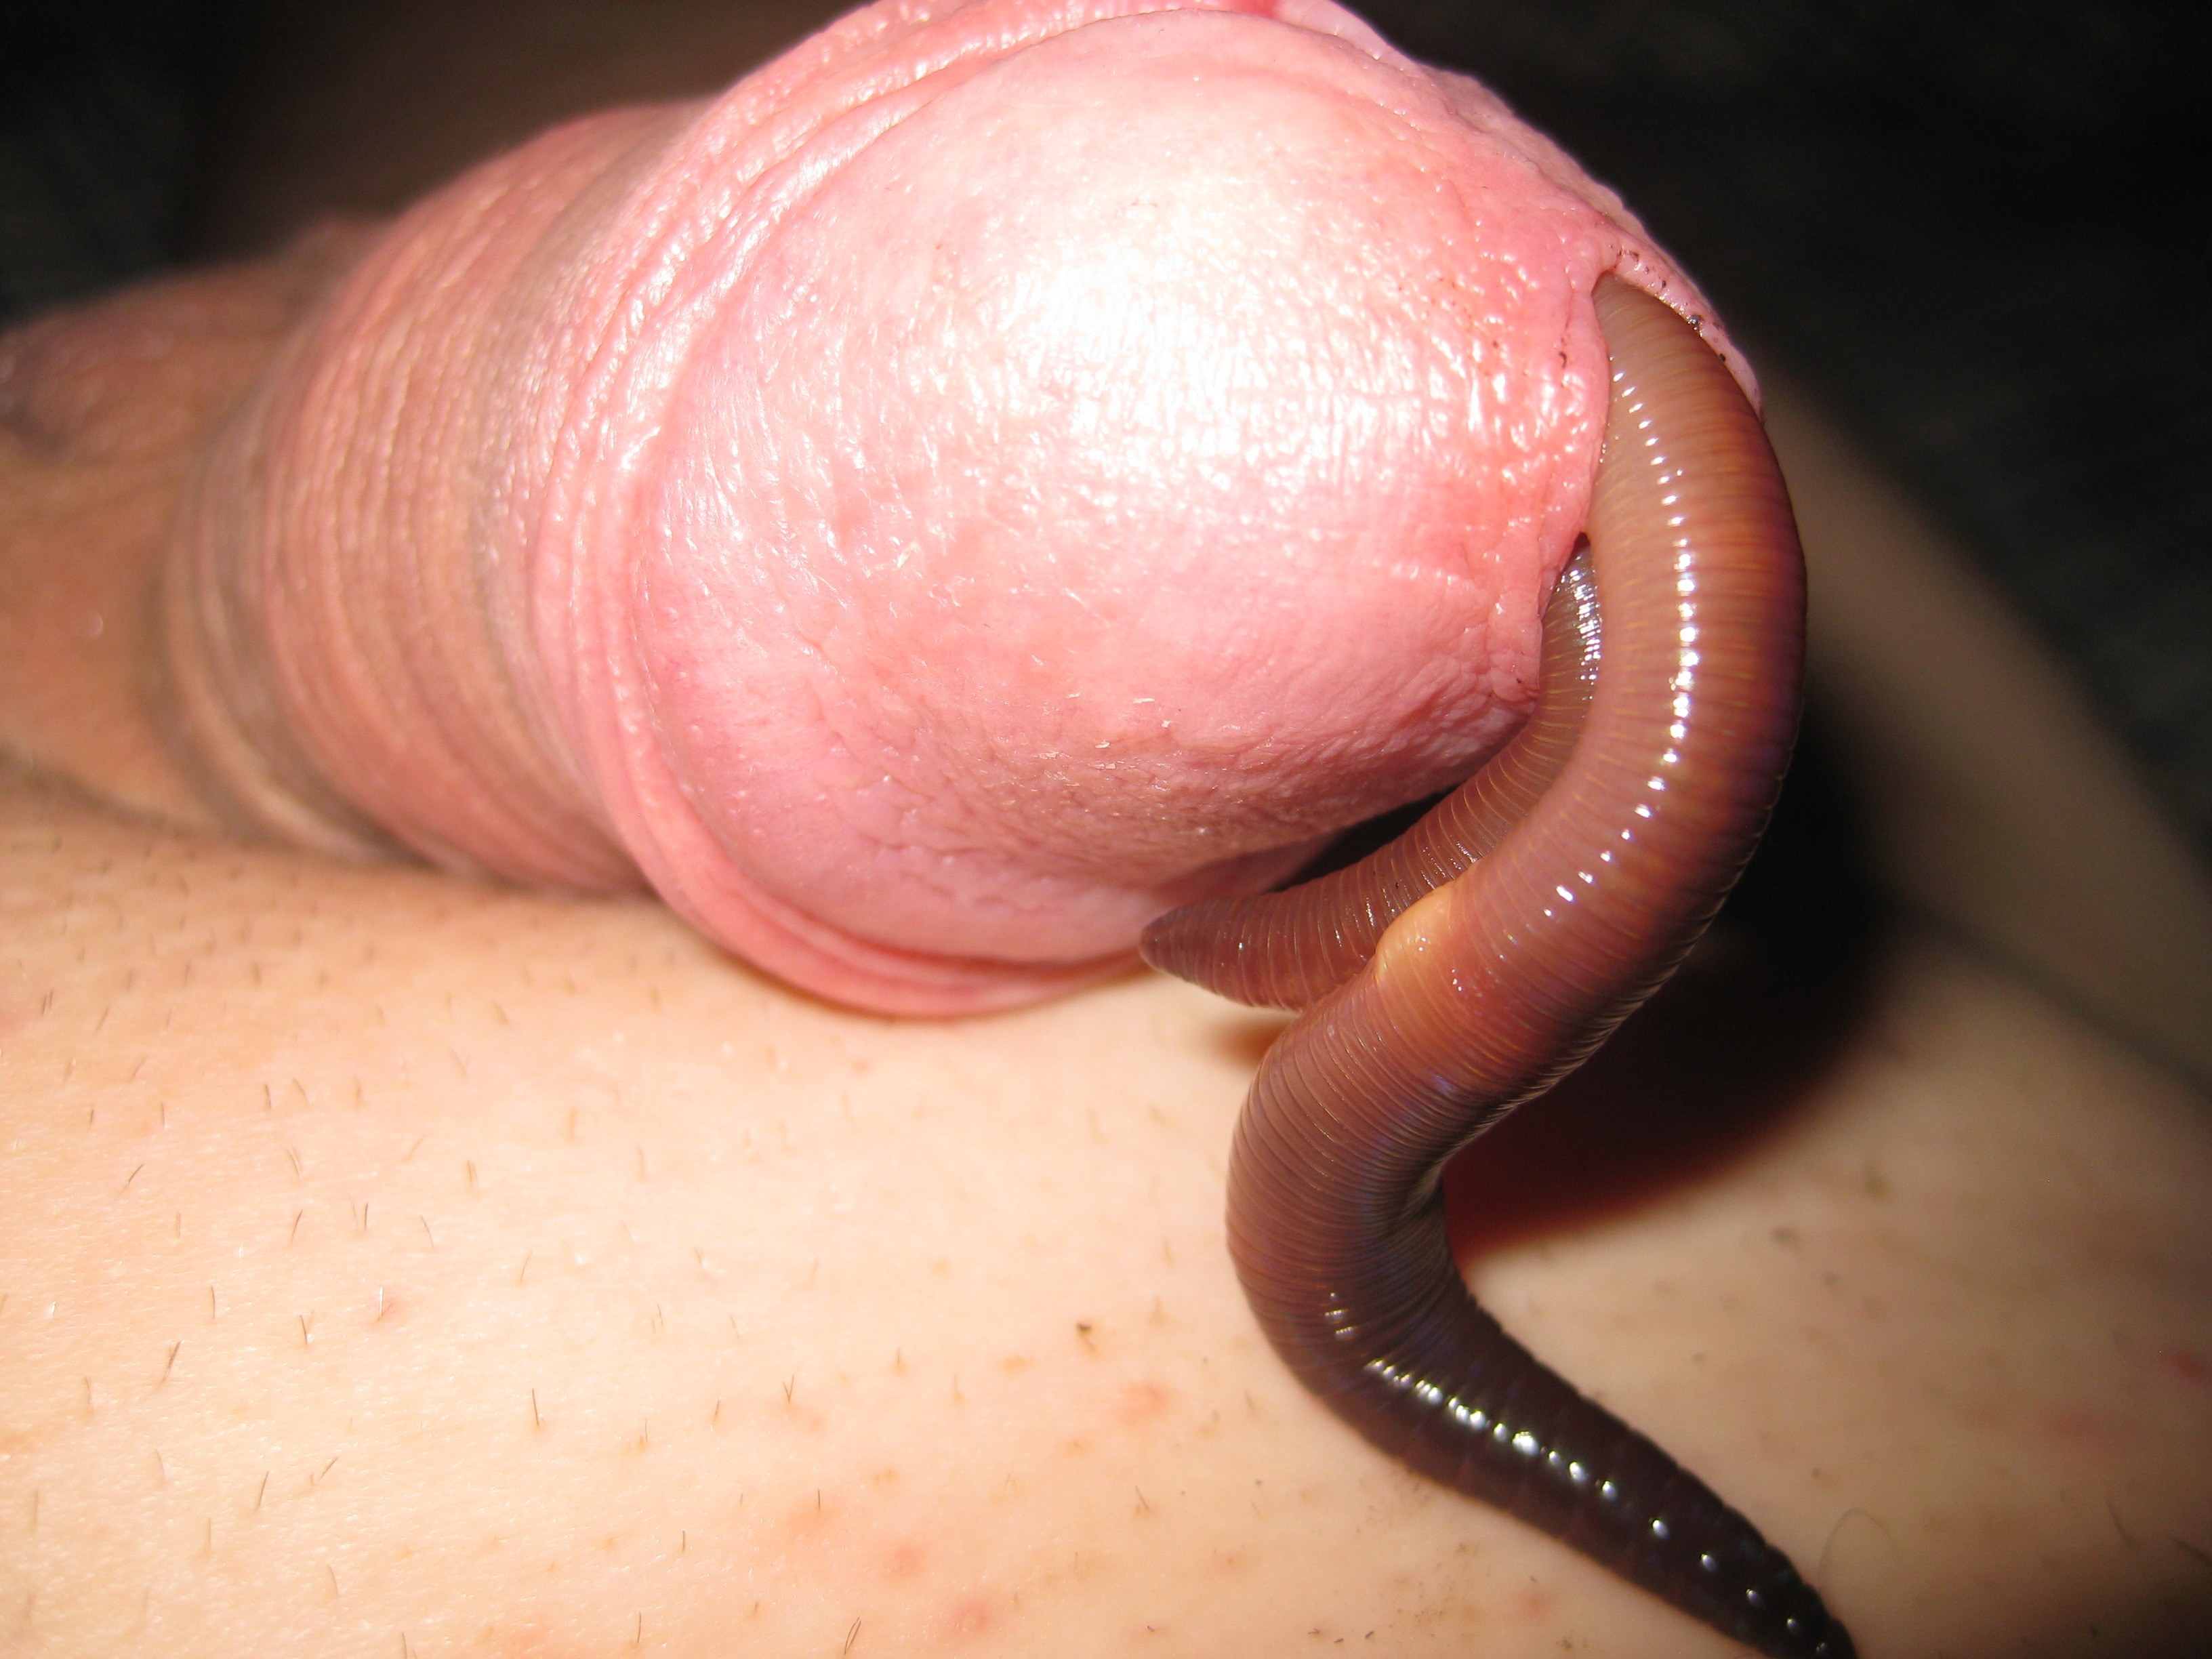 Worm in mans dick